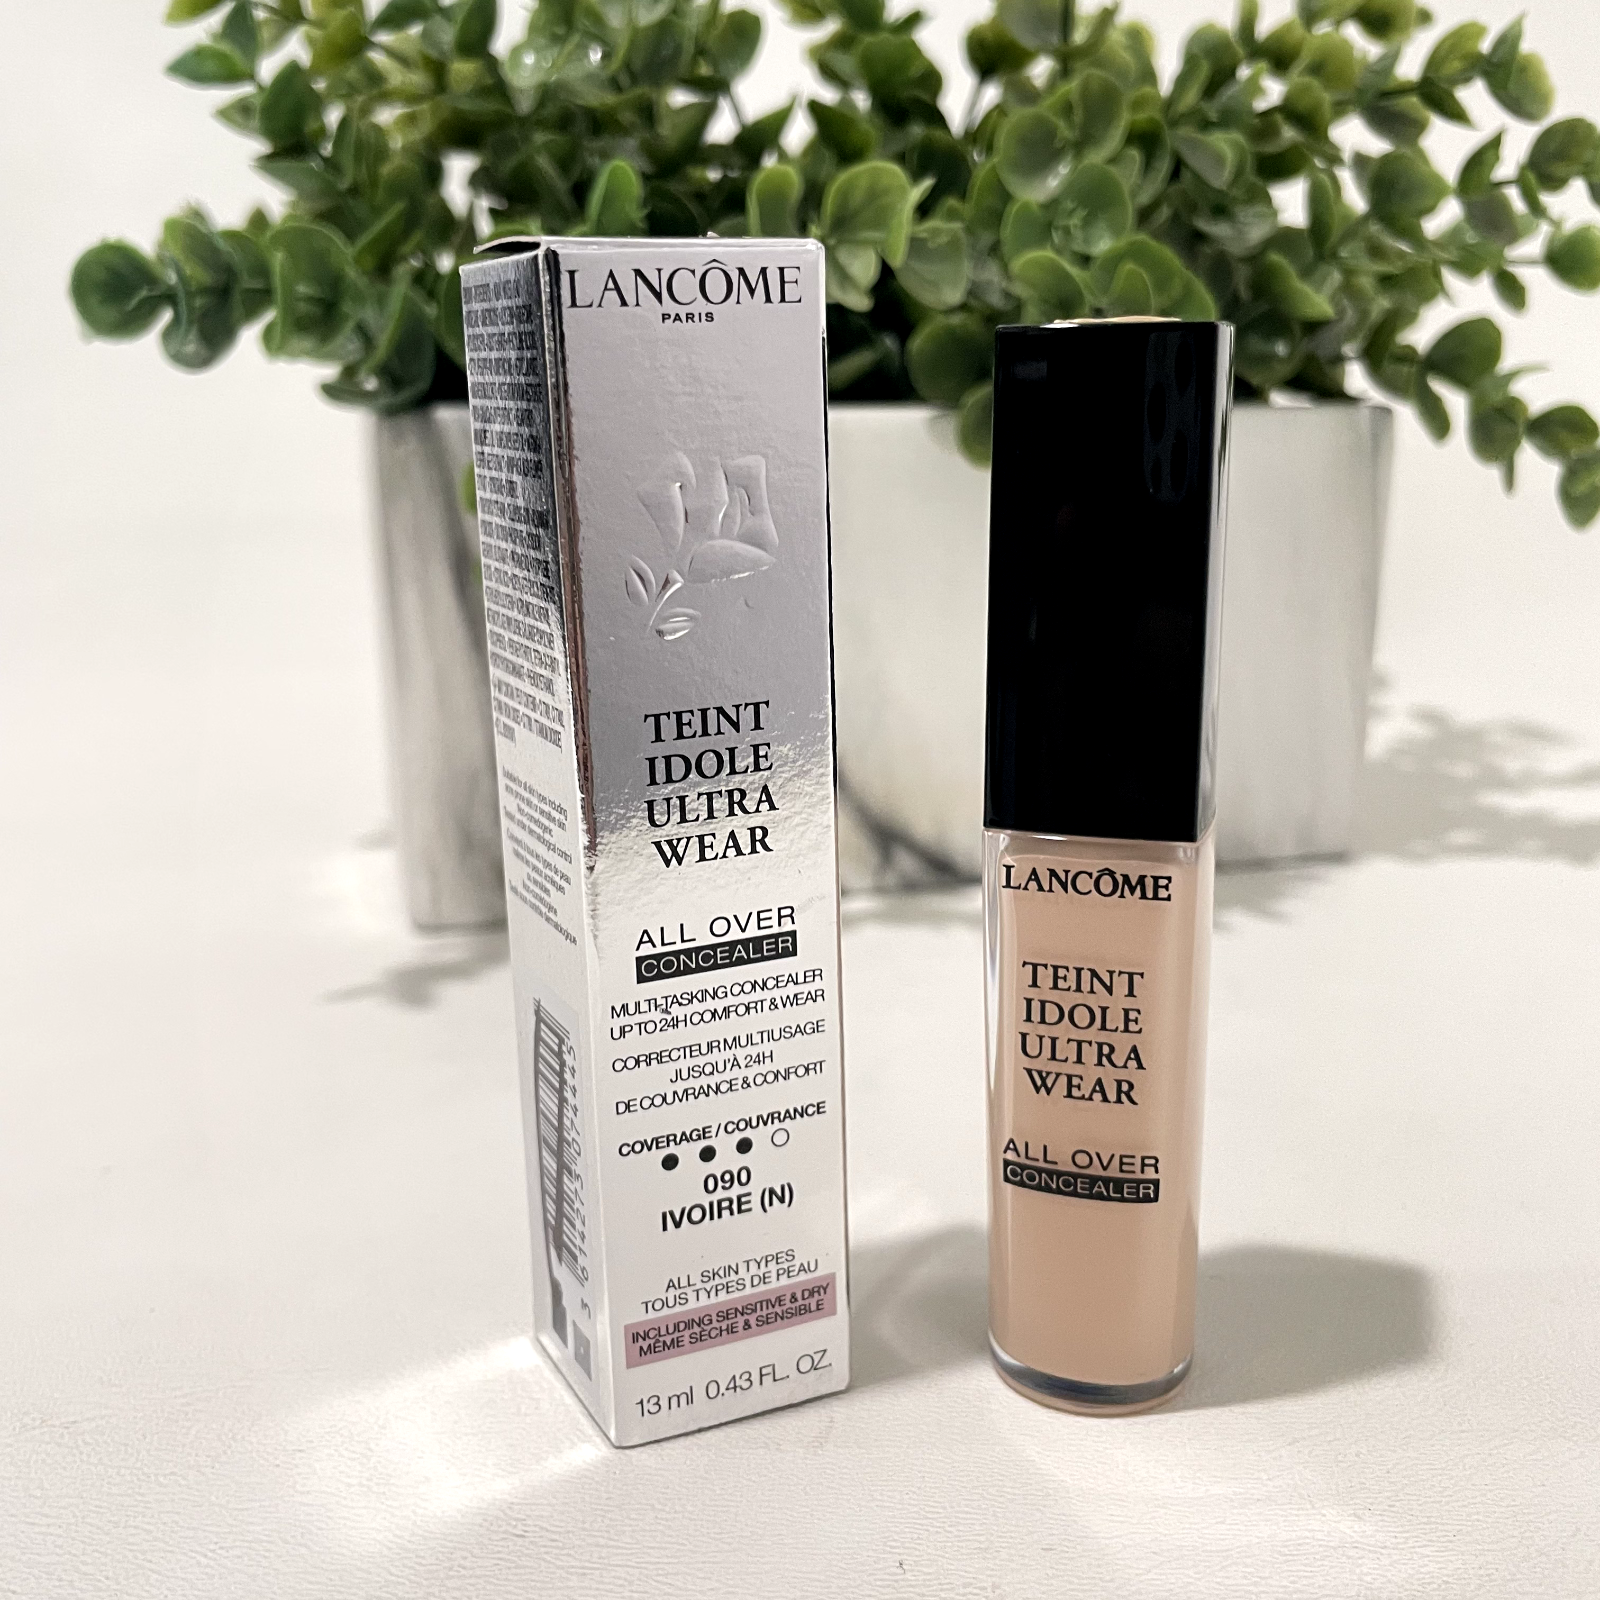 Lancome - Teint Idole Ultra Wear - All Over Concealer - 090 Ivoire